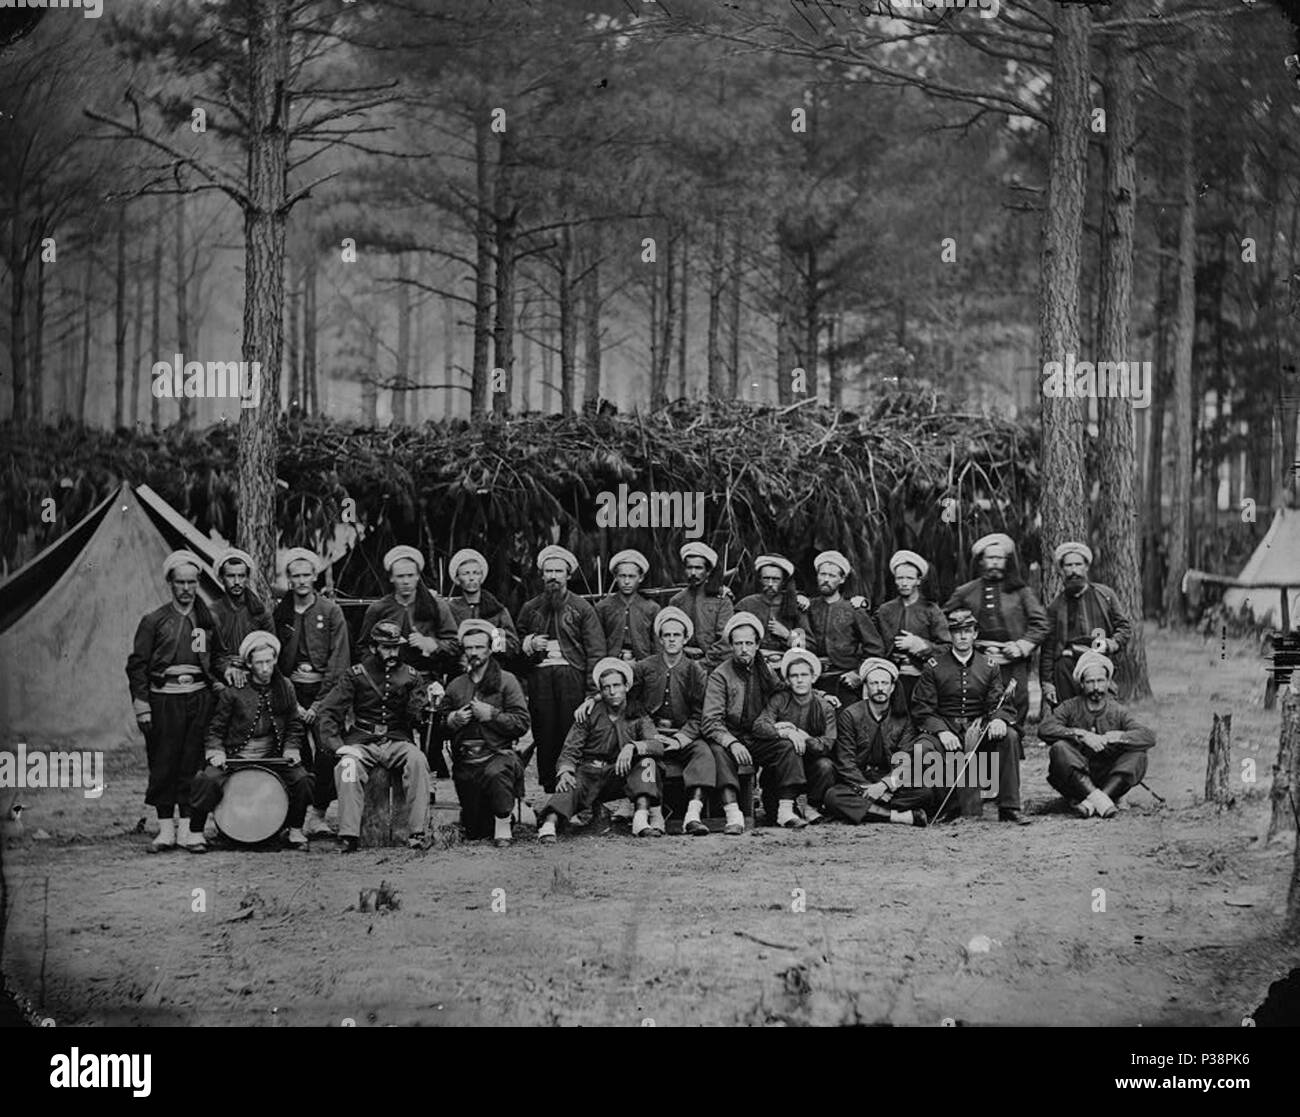 . [Petersburg, Va. Company H, 114th Pennsylvania Infantry (Zouaves)]. Photograph from the main eastern theater of war, the siege of Petersburg, June 1864-April 1865.. April 1864 2 Company H, 114th Pennsylvania Infantry Stock Photo